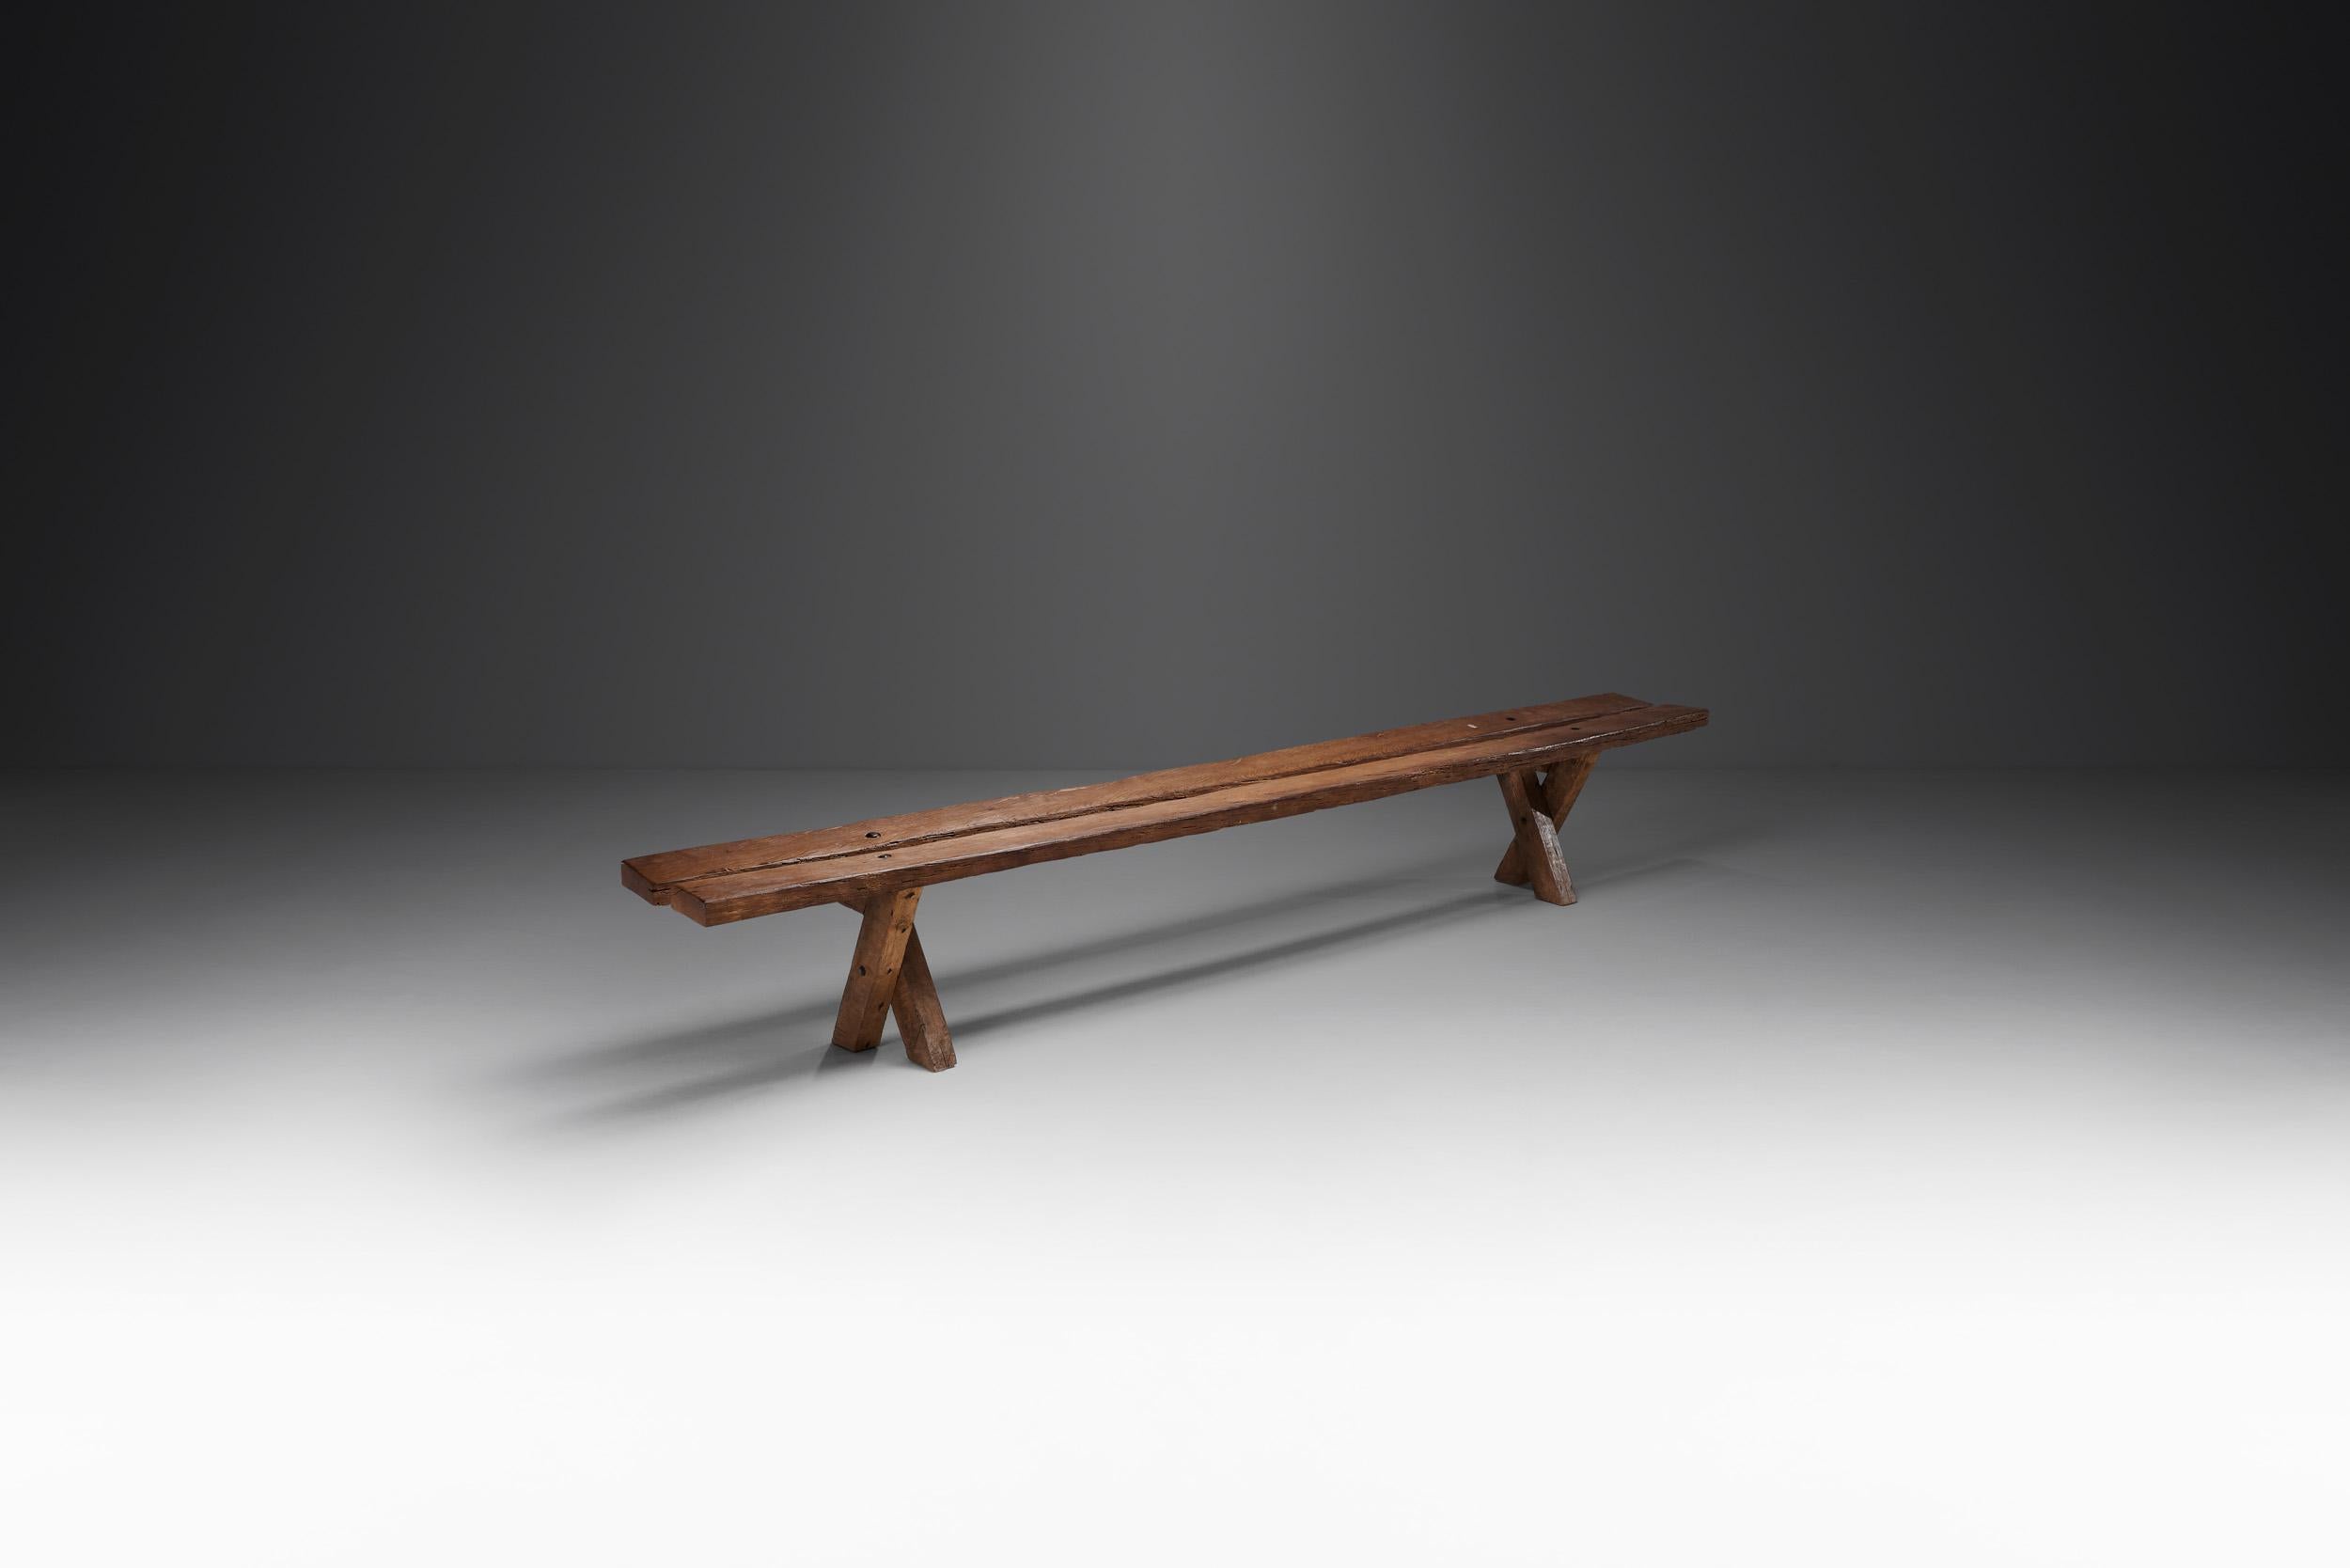 Like the bench with backrests, this simple bench was created by Jean and Sébastien Touret for a religious community of Loir et Cher -a department in the Centre-Val de Loire region of France - from oak of the property. This also means that these